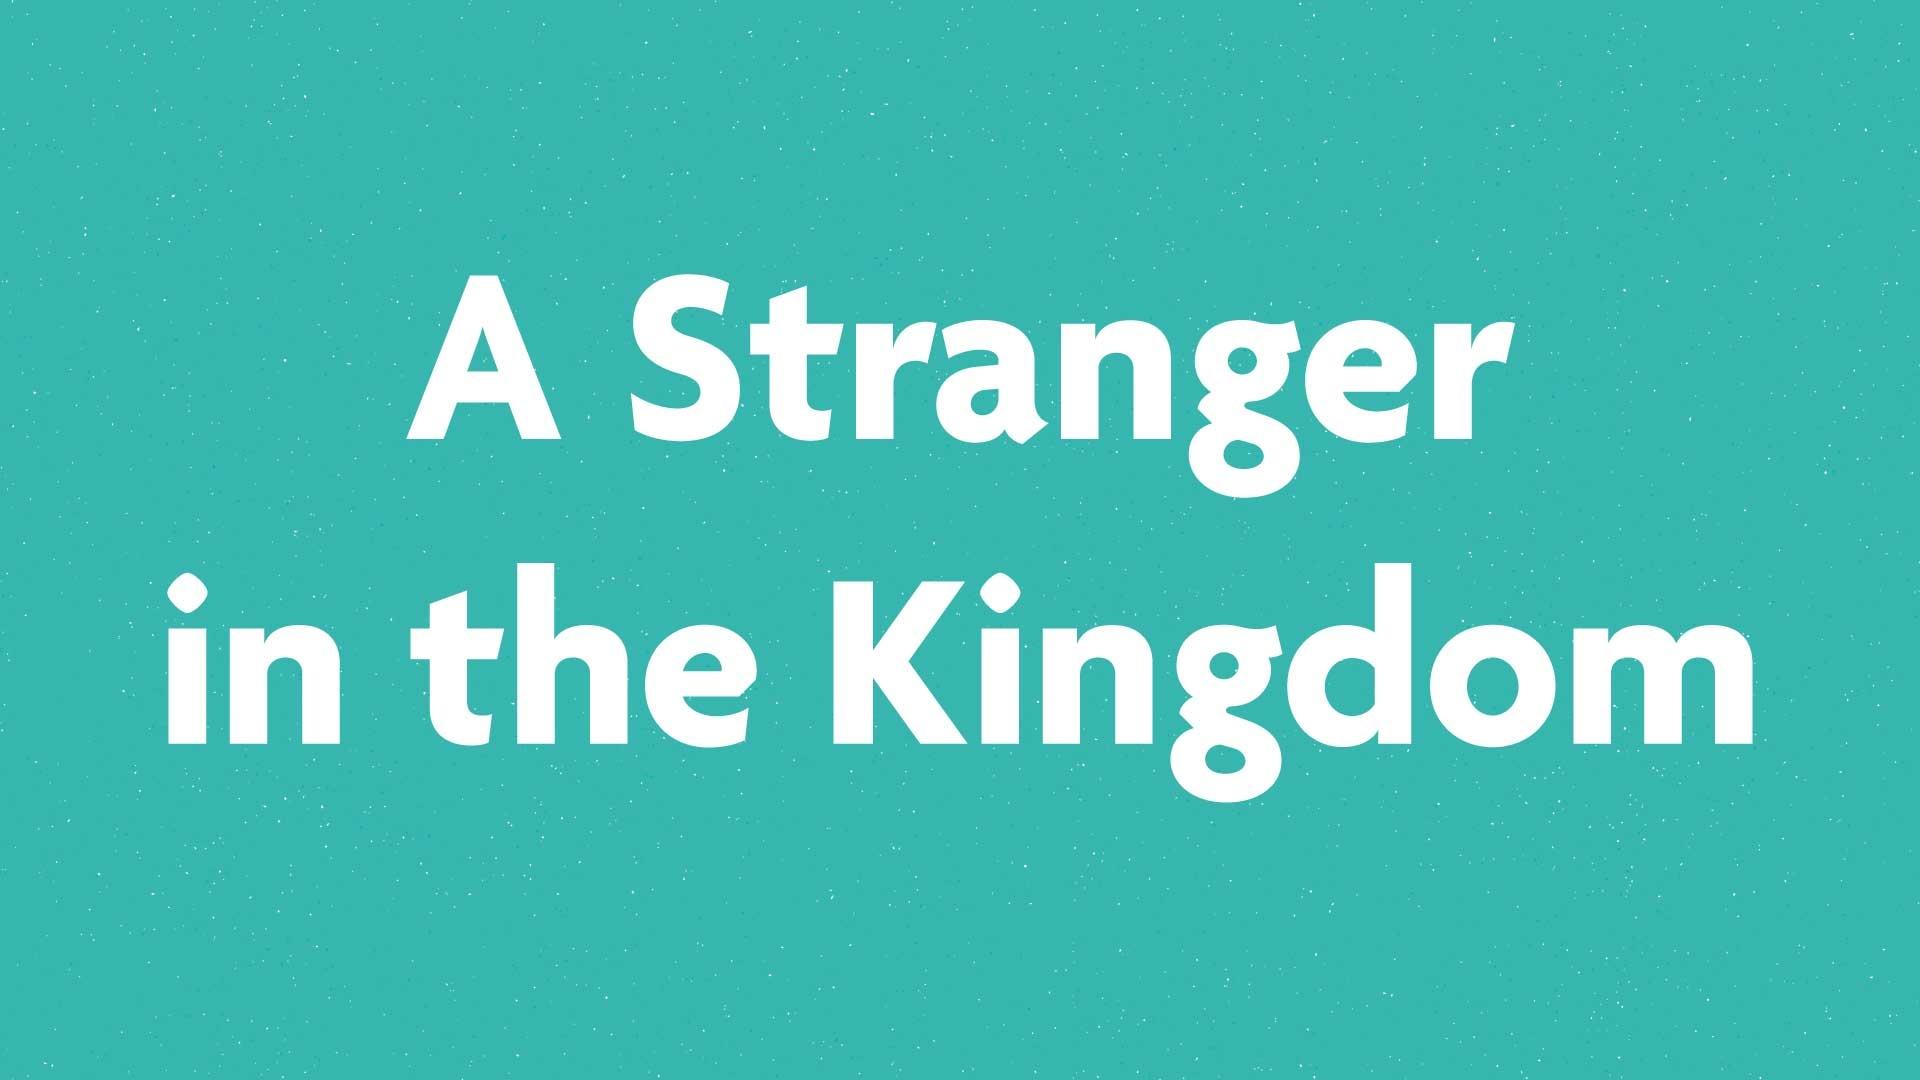 A Stranger in the Kingdom book submission card on a green background.